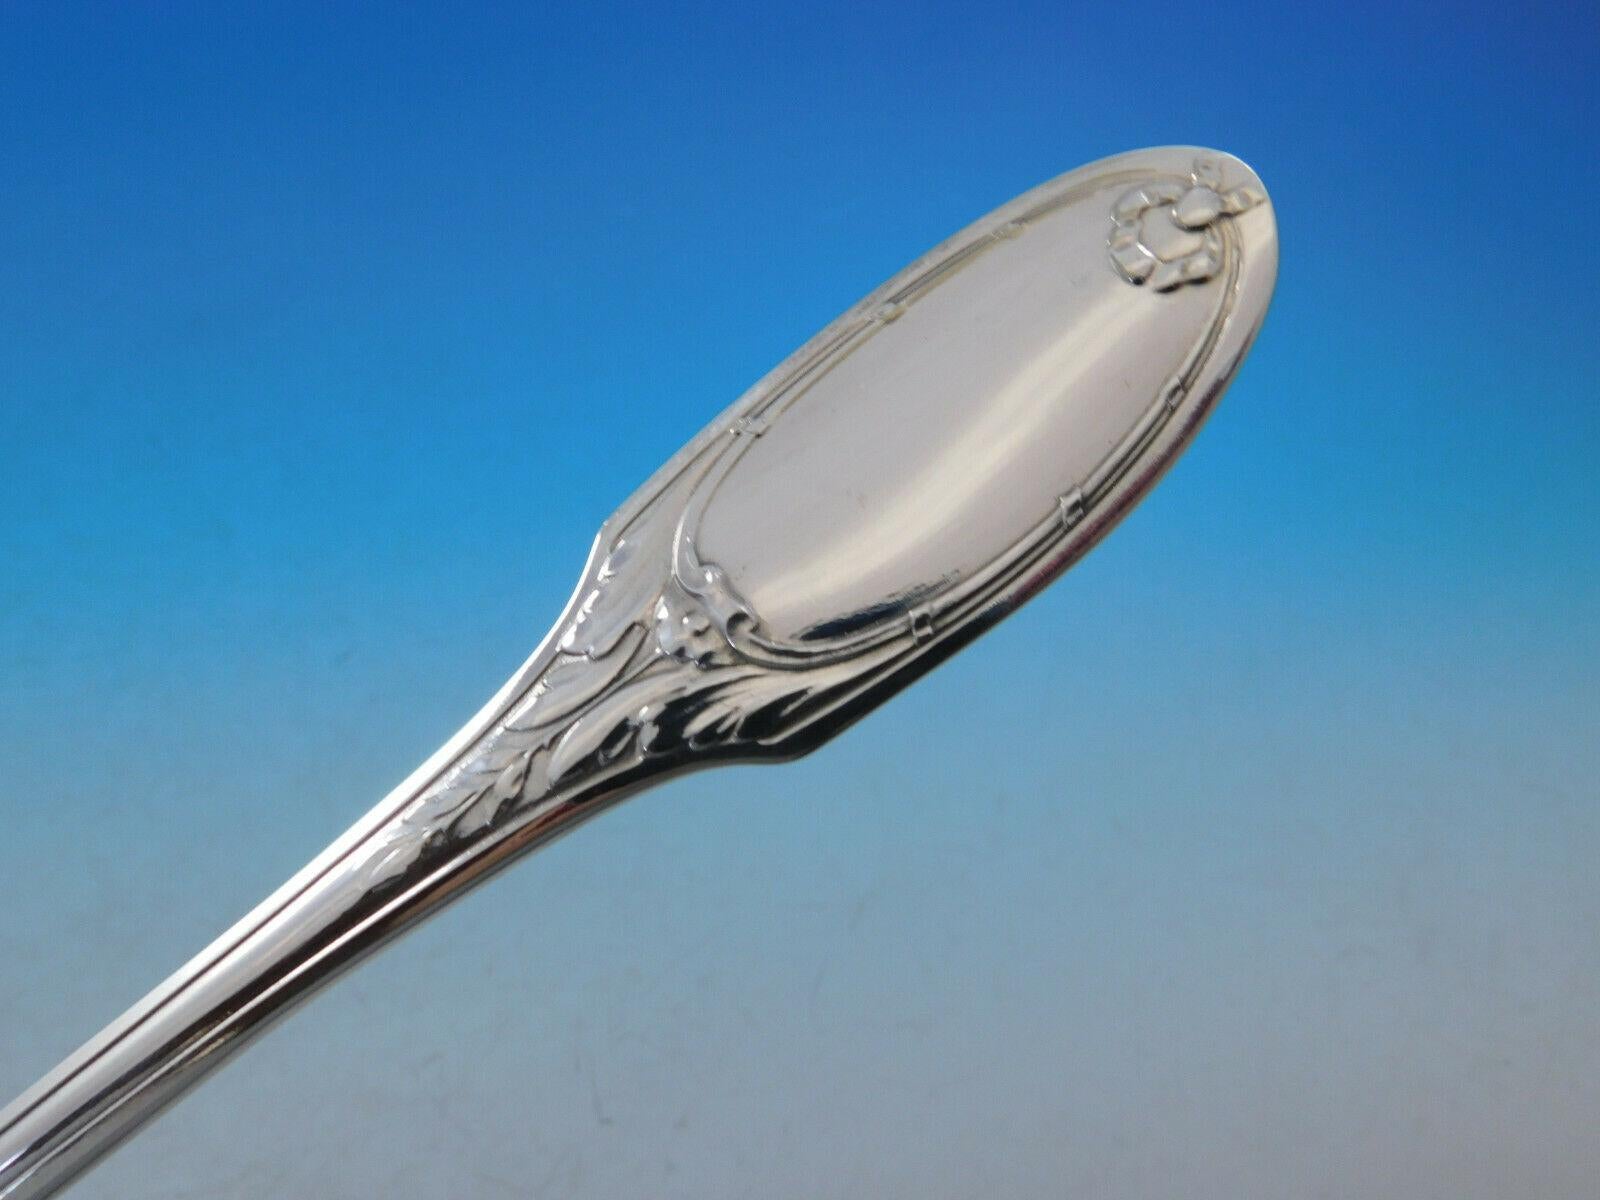 With a dedication to perfection and quality, Christofle flatware creations unite craftsmanship and modern technique, resulting in flatware to be handed down through generations. 

Marie Antoinette by Christofle France silver plate flatware set